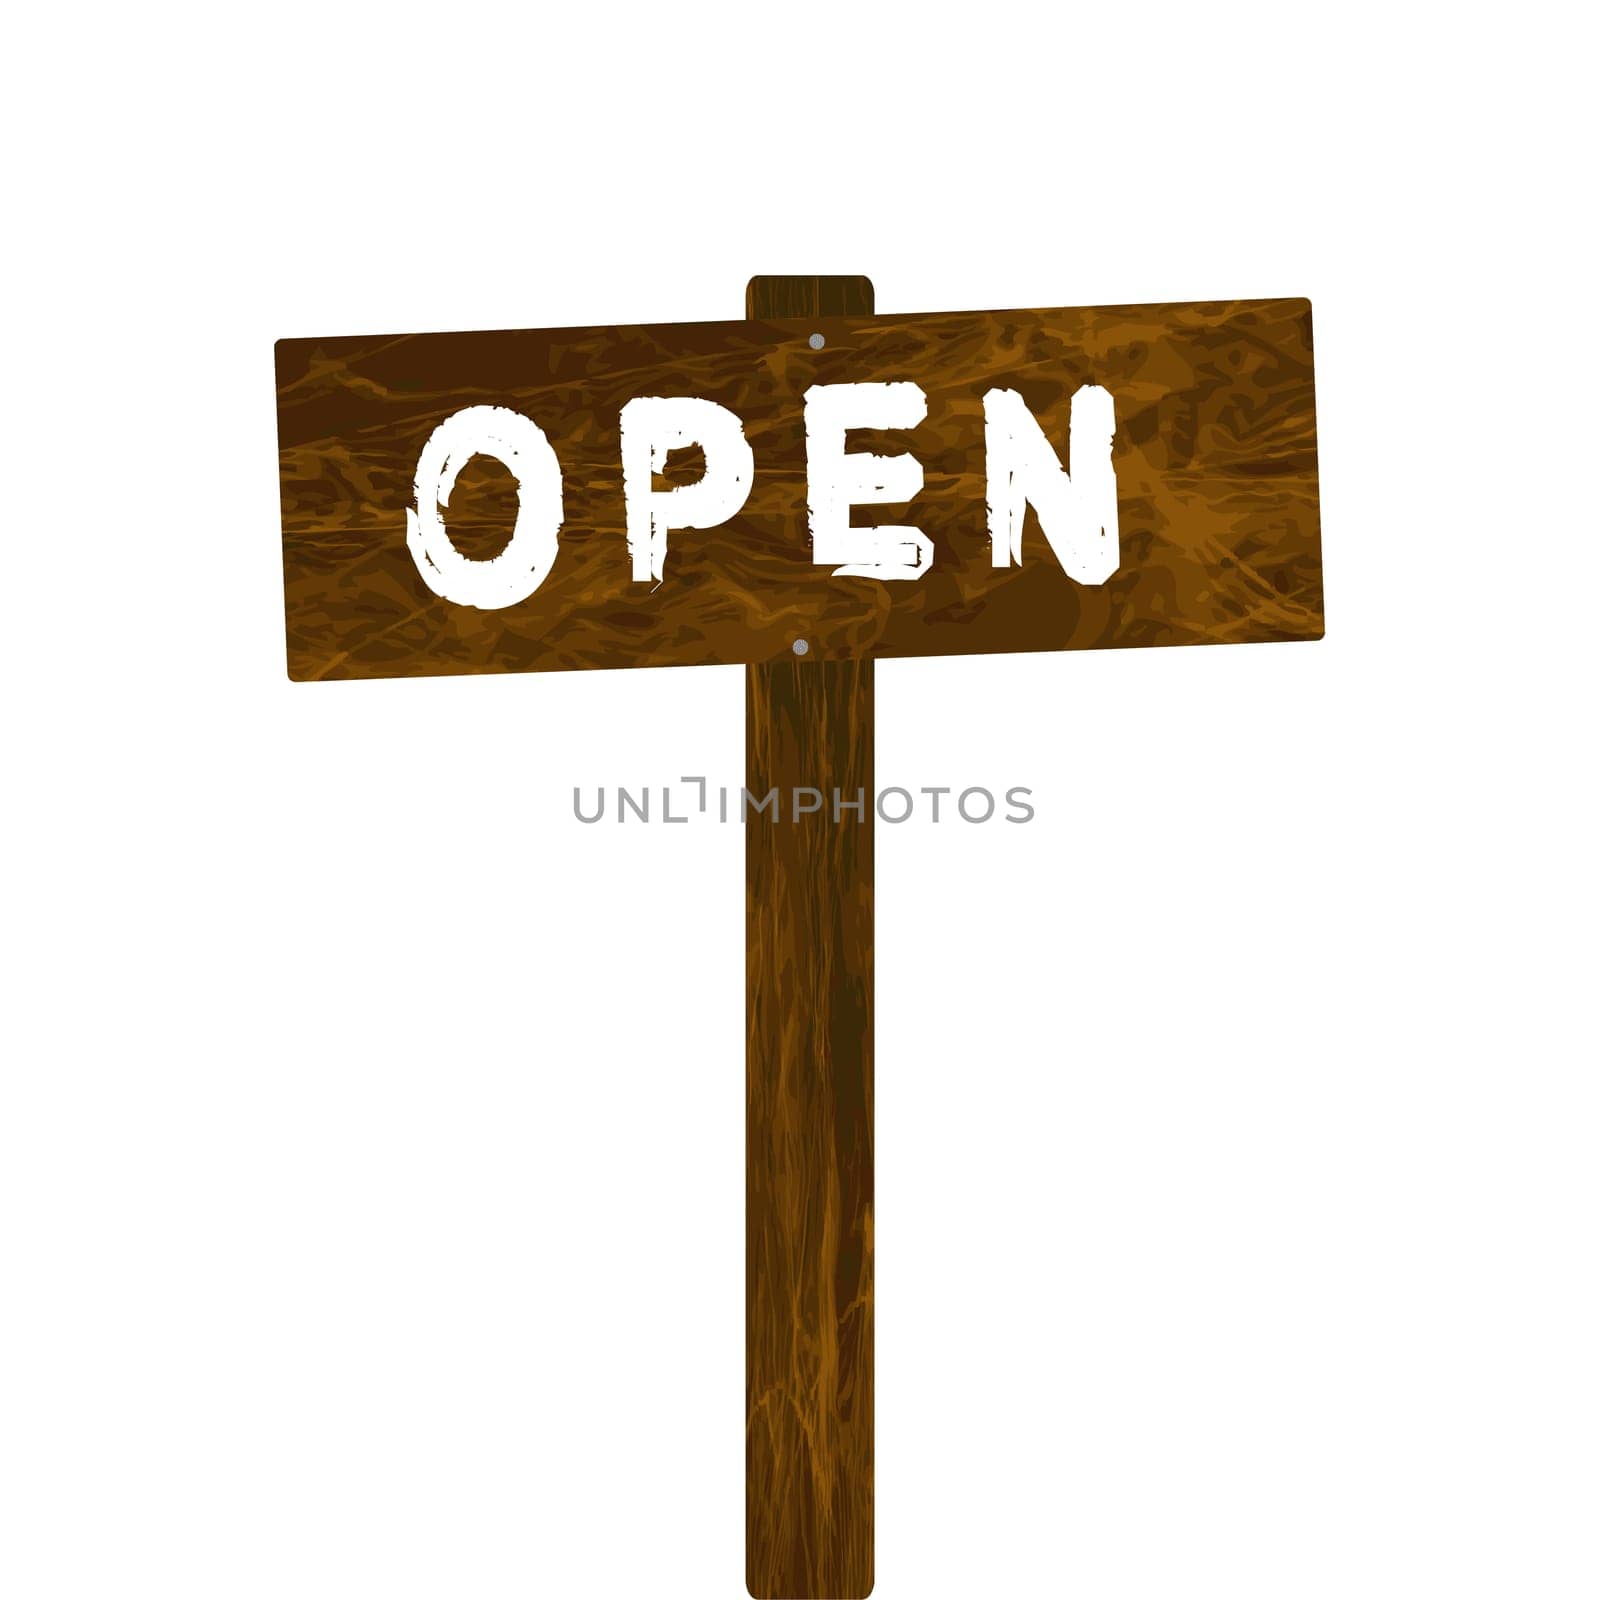 Open wooden sign isolated on white background